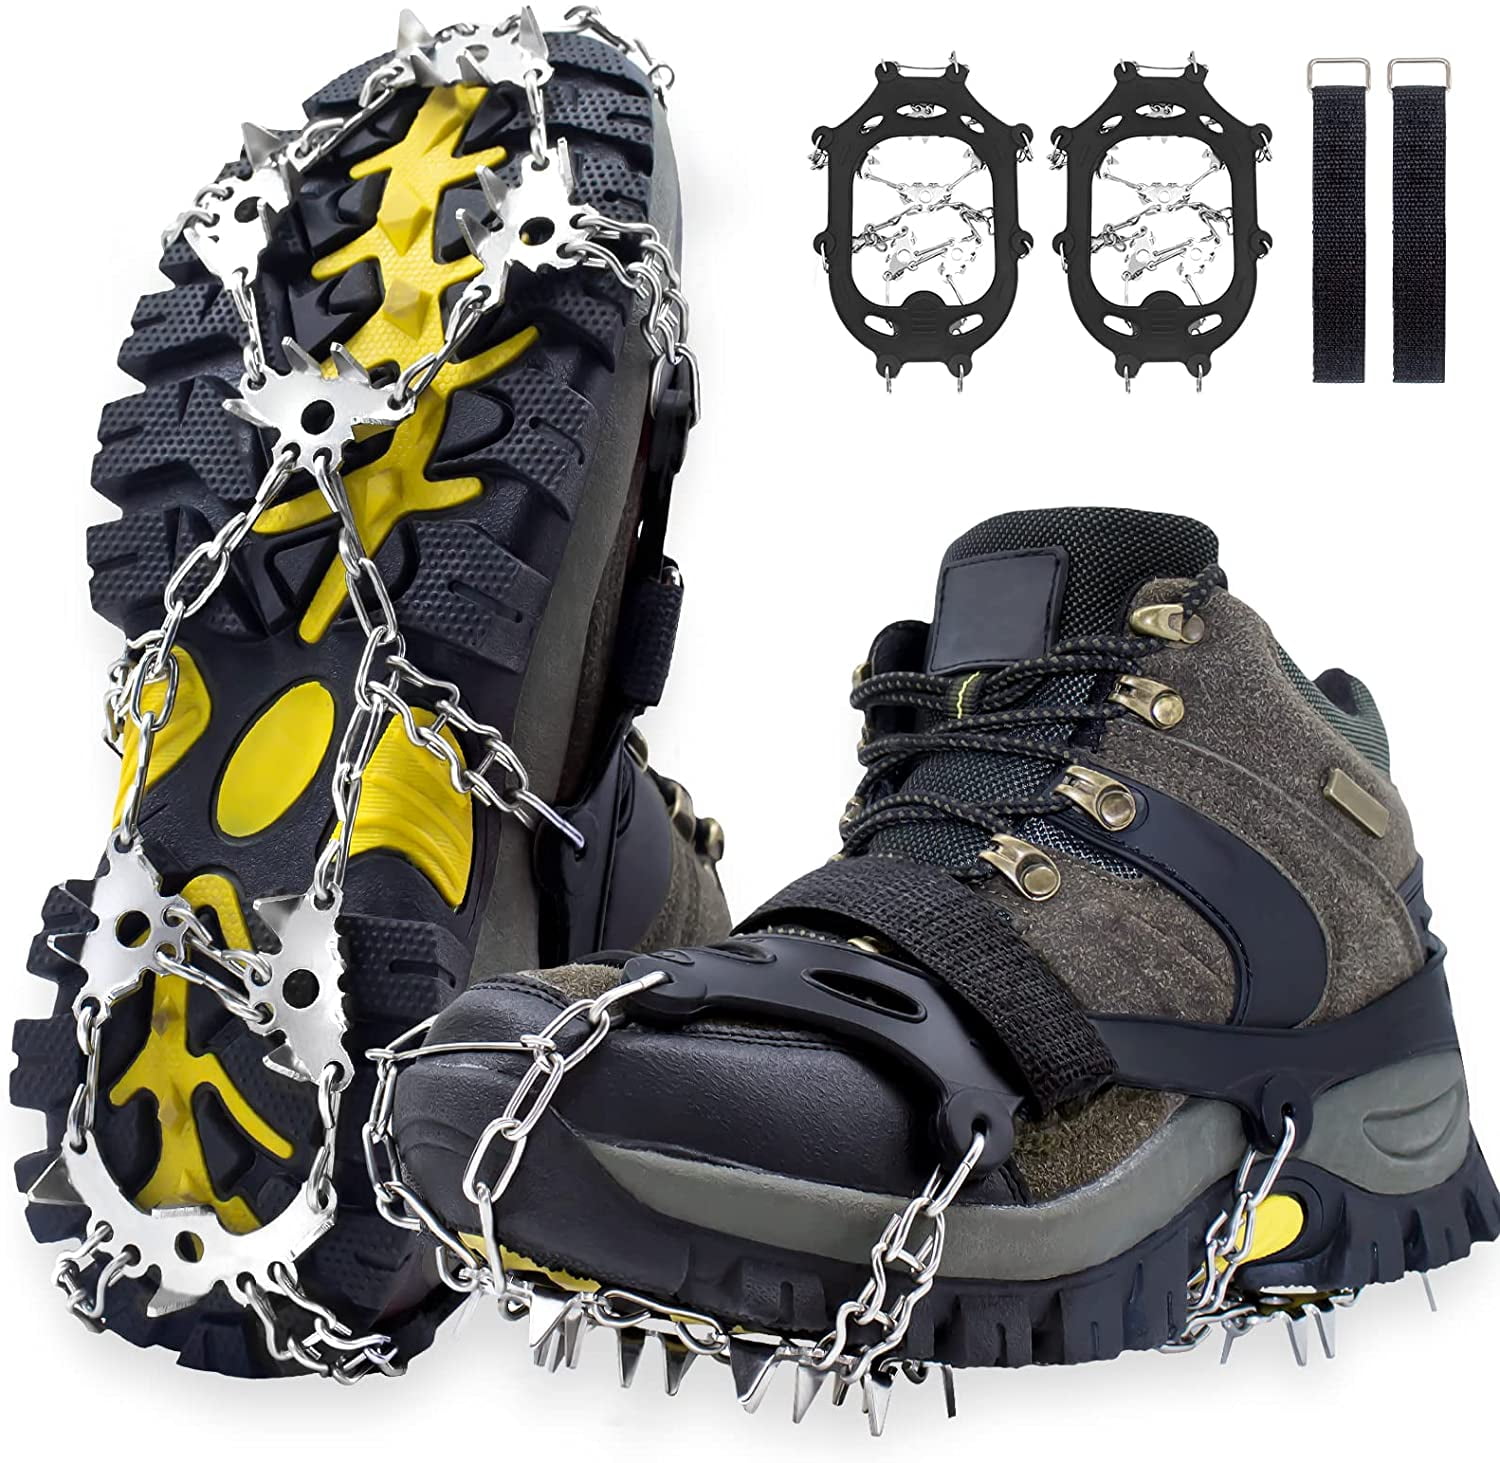 Mountaineering Hiking Crampons Non-slip Ice Trekkers Snow Shoes Chains Gripper 